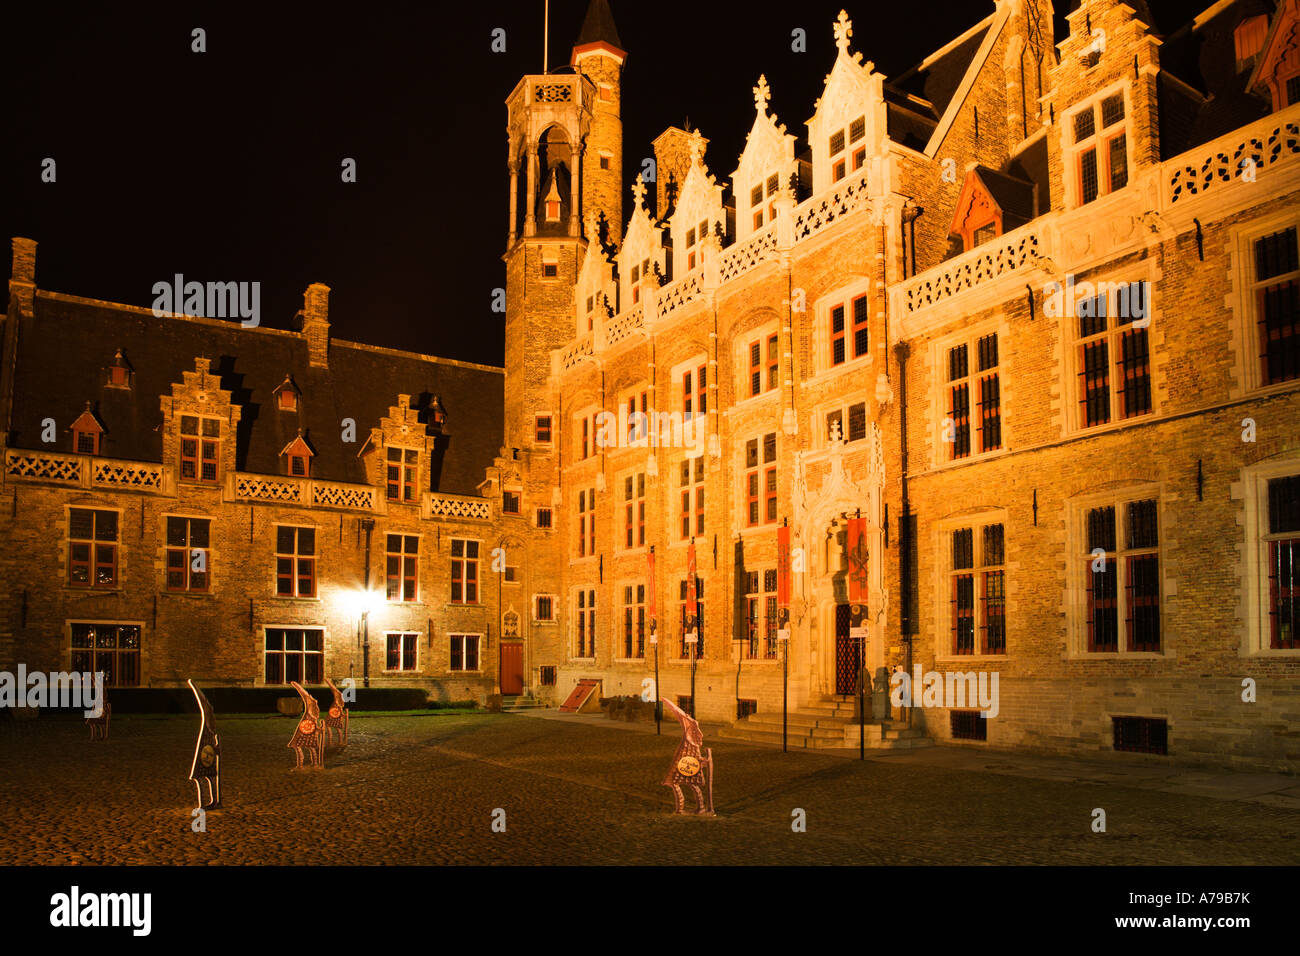 The Gruuthuse Museum at Night Bruges Belgium Stock Photo